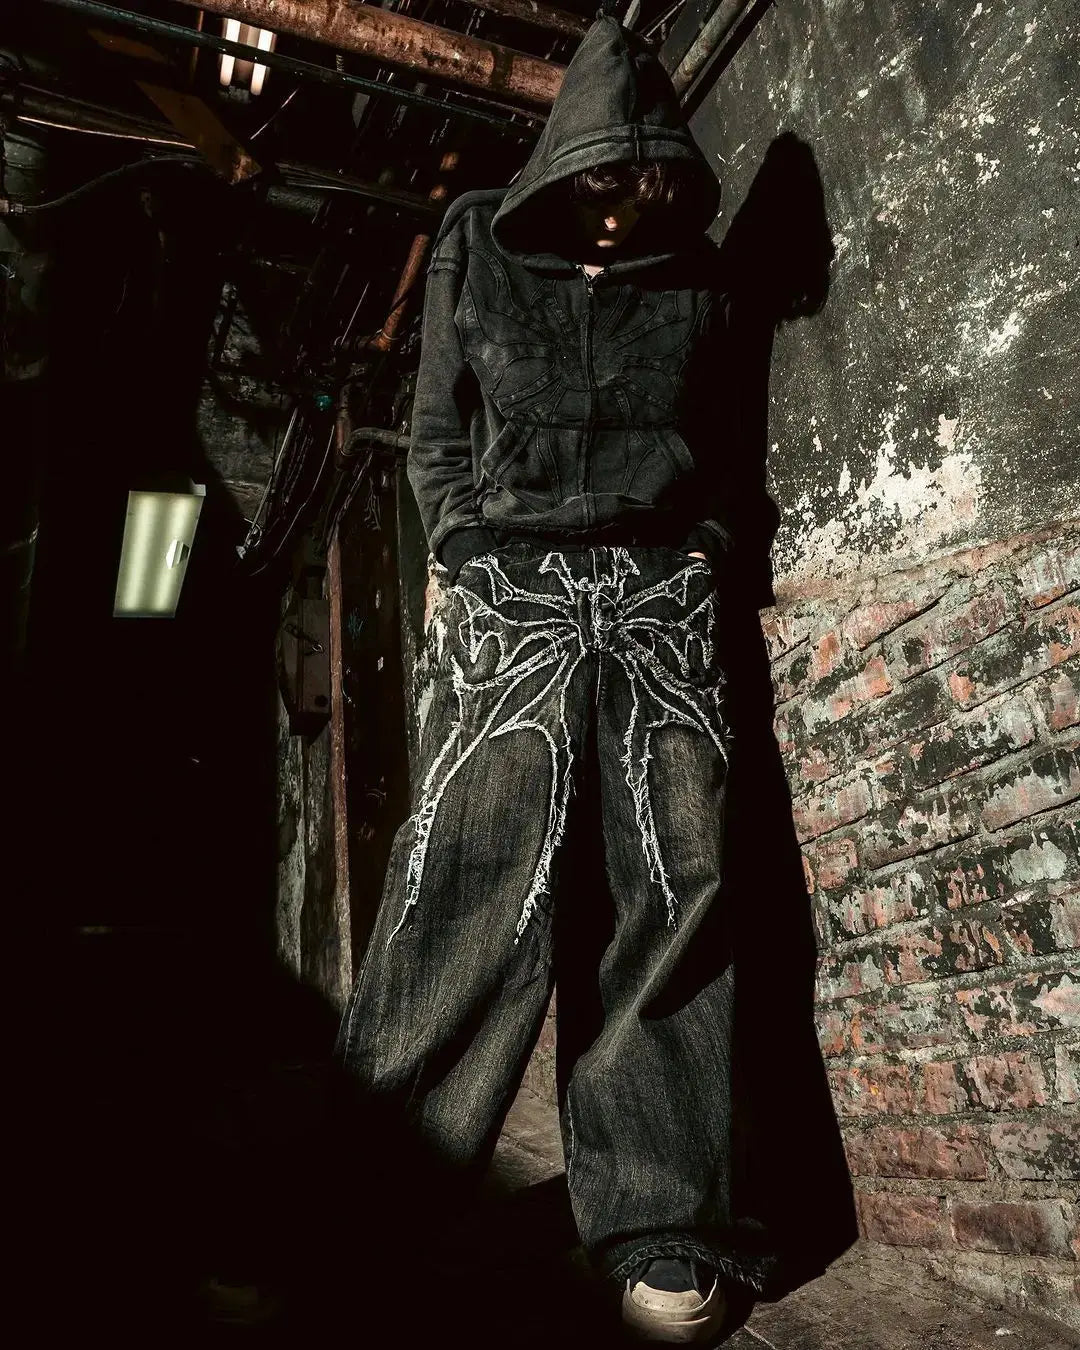 Y2K Embroided Spider Wide Leg Baggy Jean